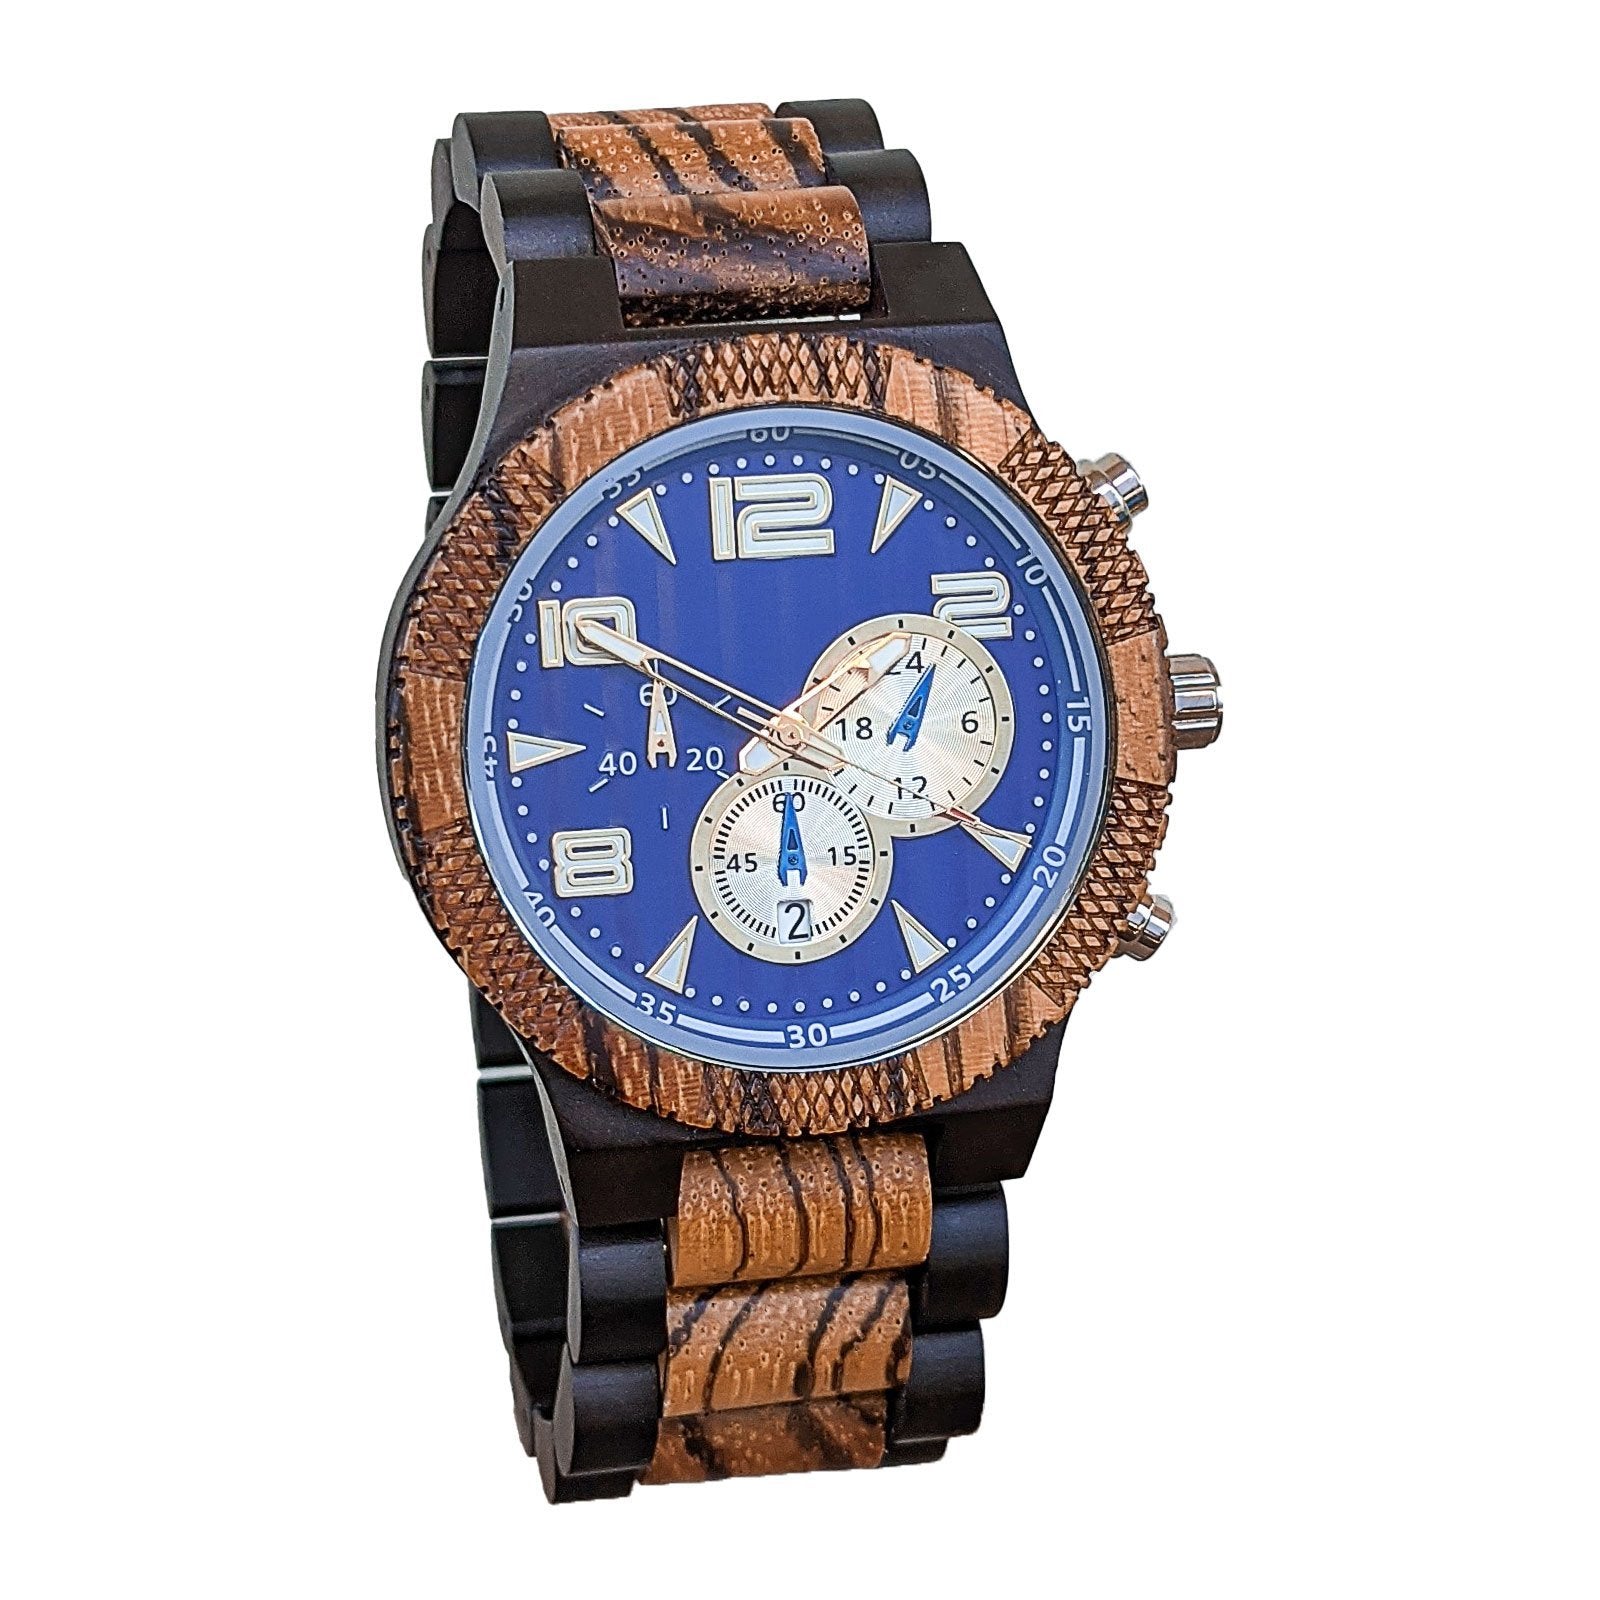  Inverted Geometric Wood Watch Creative Quartz Watch for Men  Hand-Made Wooden Watches : Clothing, Shoes & Jewelry